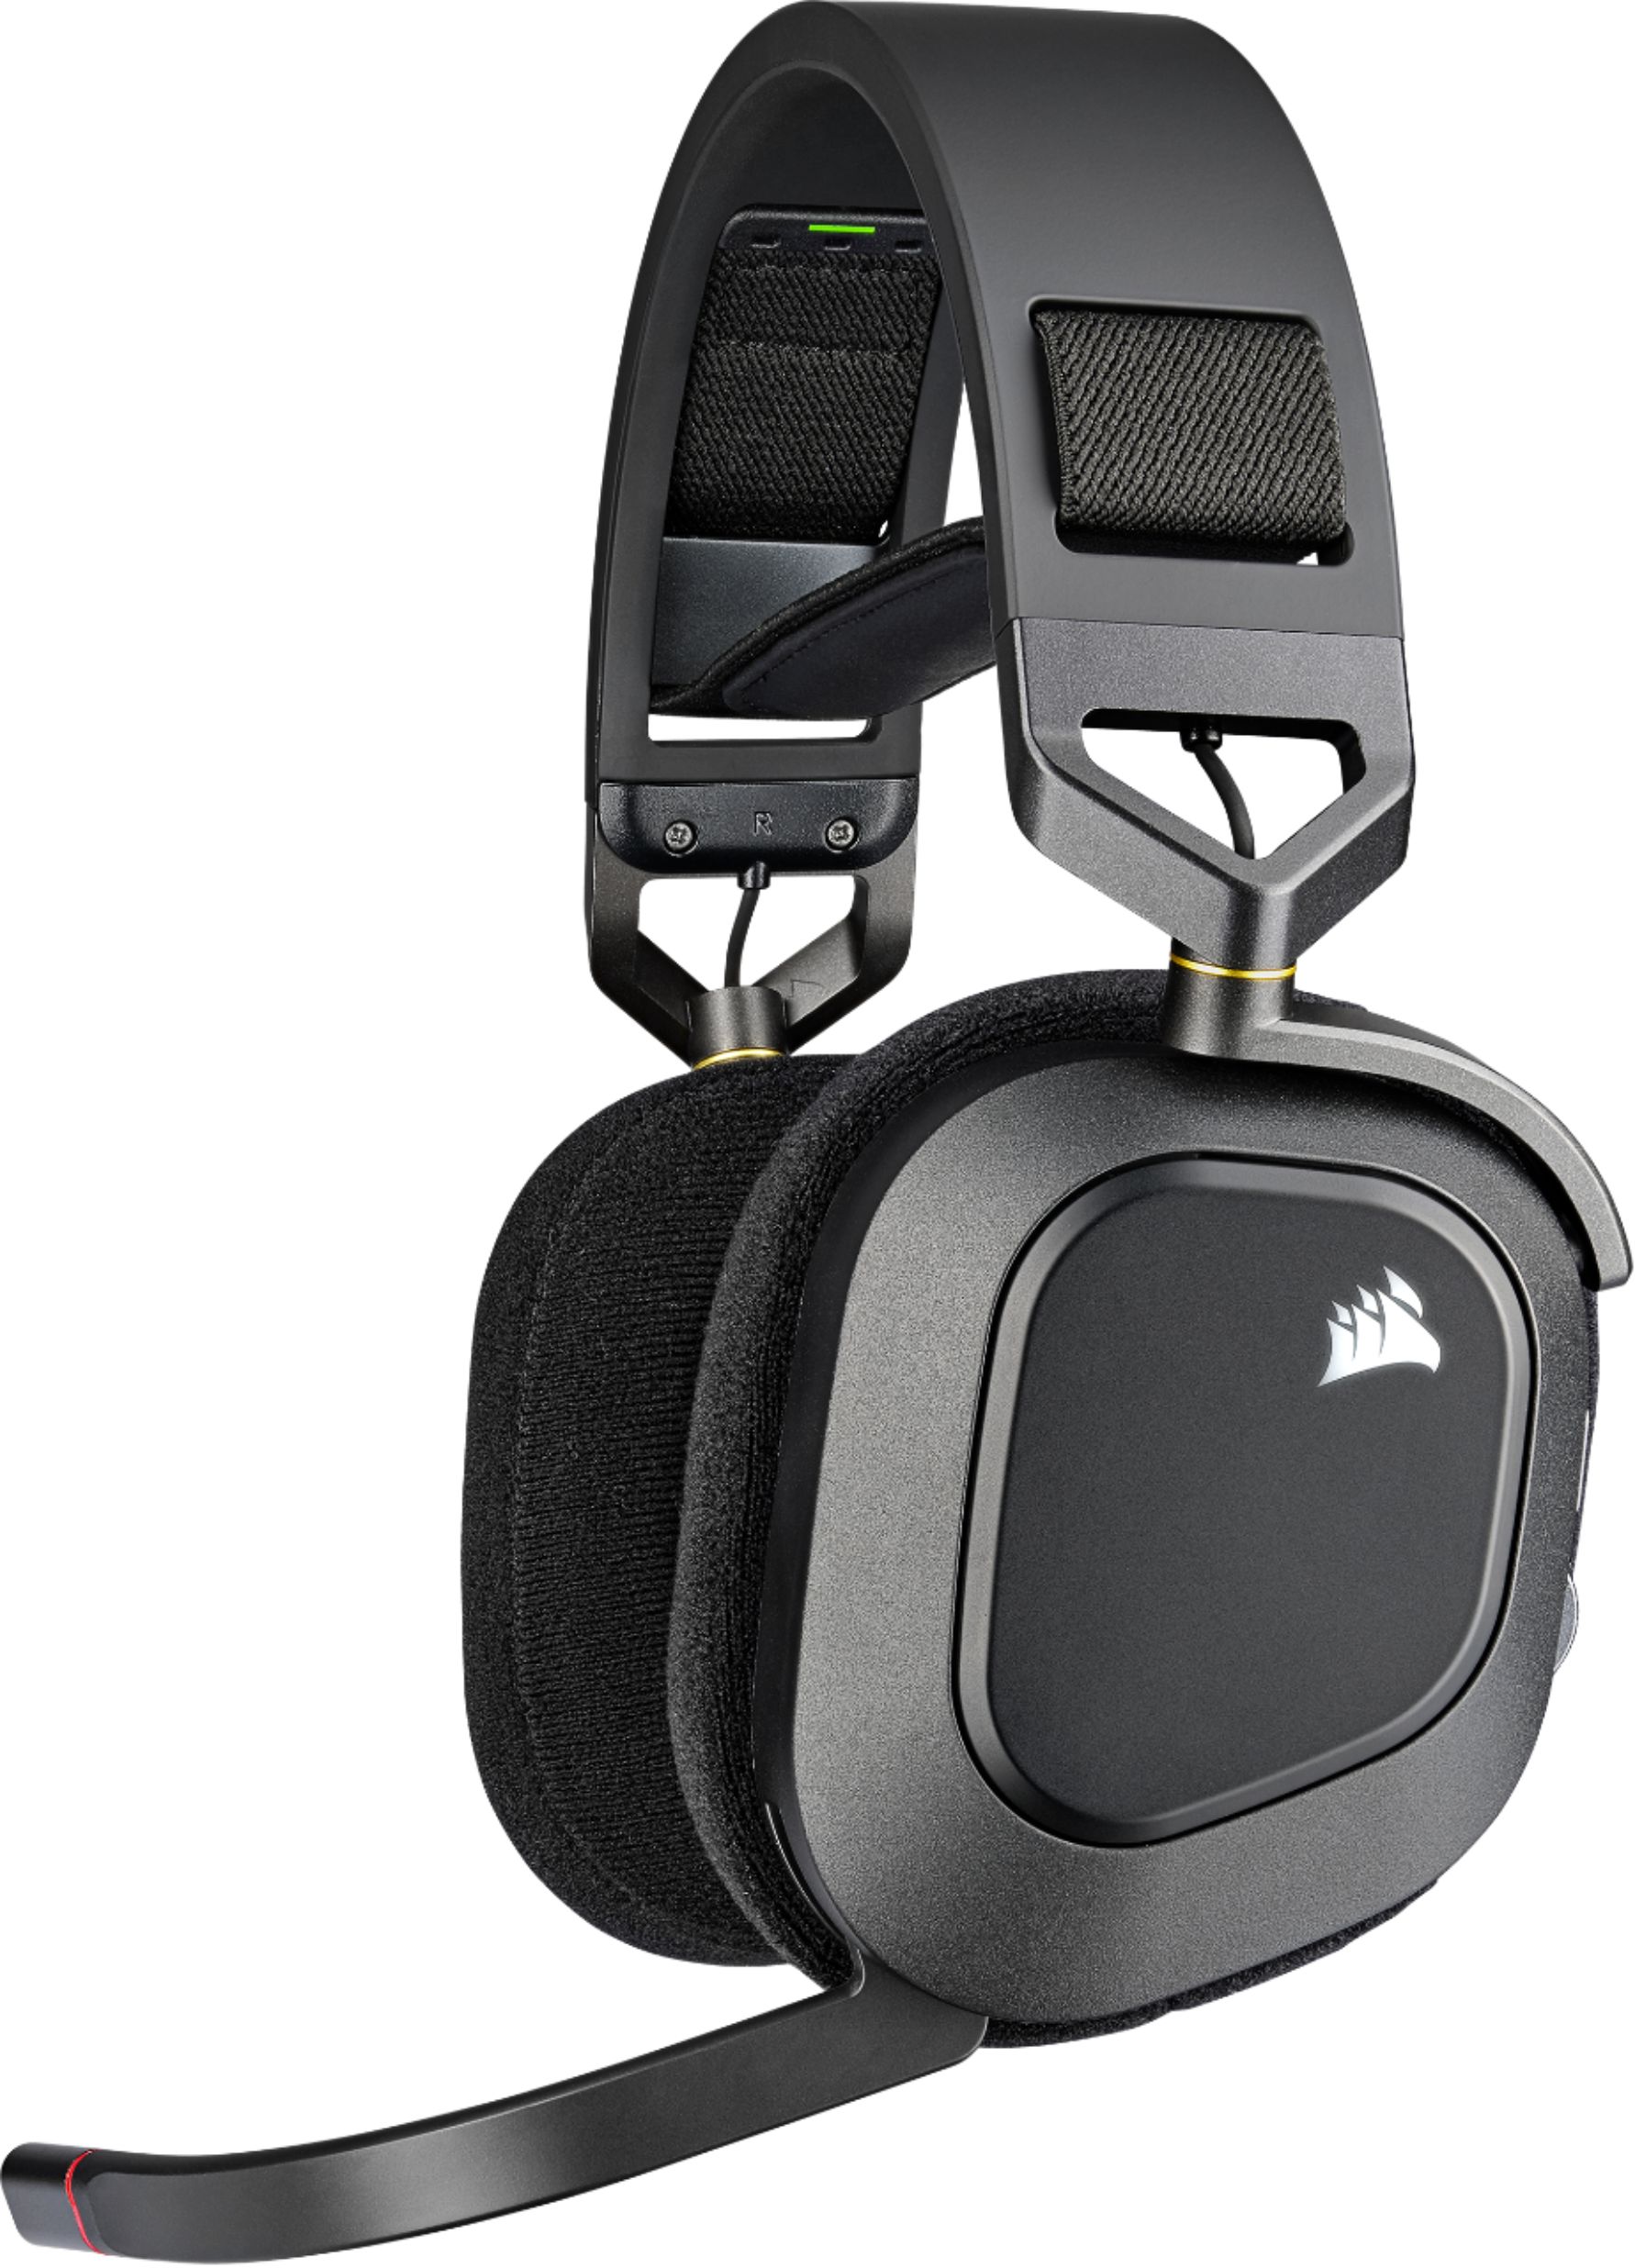 Haat Kwijtschelding Couscous CORSAIR HS80 RGB WIRELESS Dolby Atmos Gaming Headset for PC, Mac, PS5|PS4  with Broadcast-Grade Omni-Directional Microphone Carbon CA-9011235-NA - Best  Buy